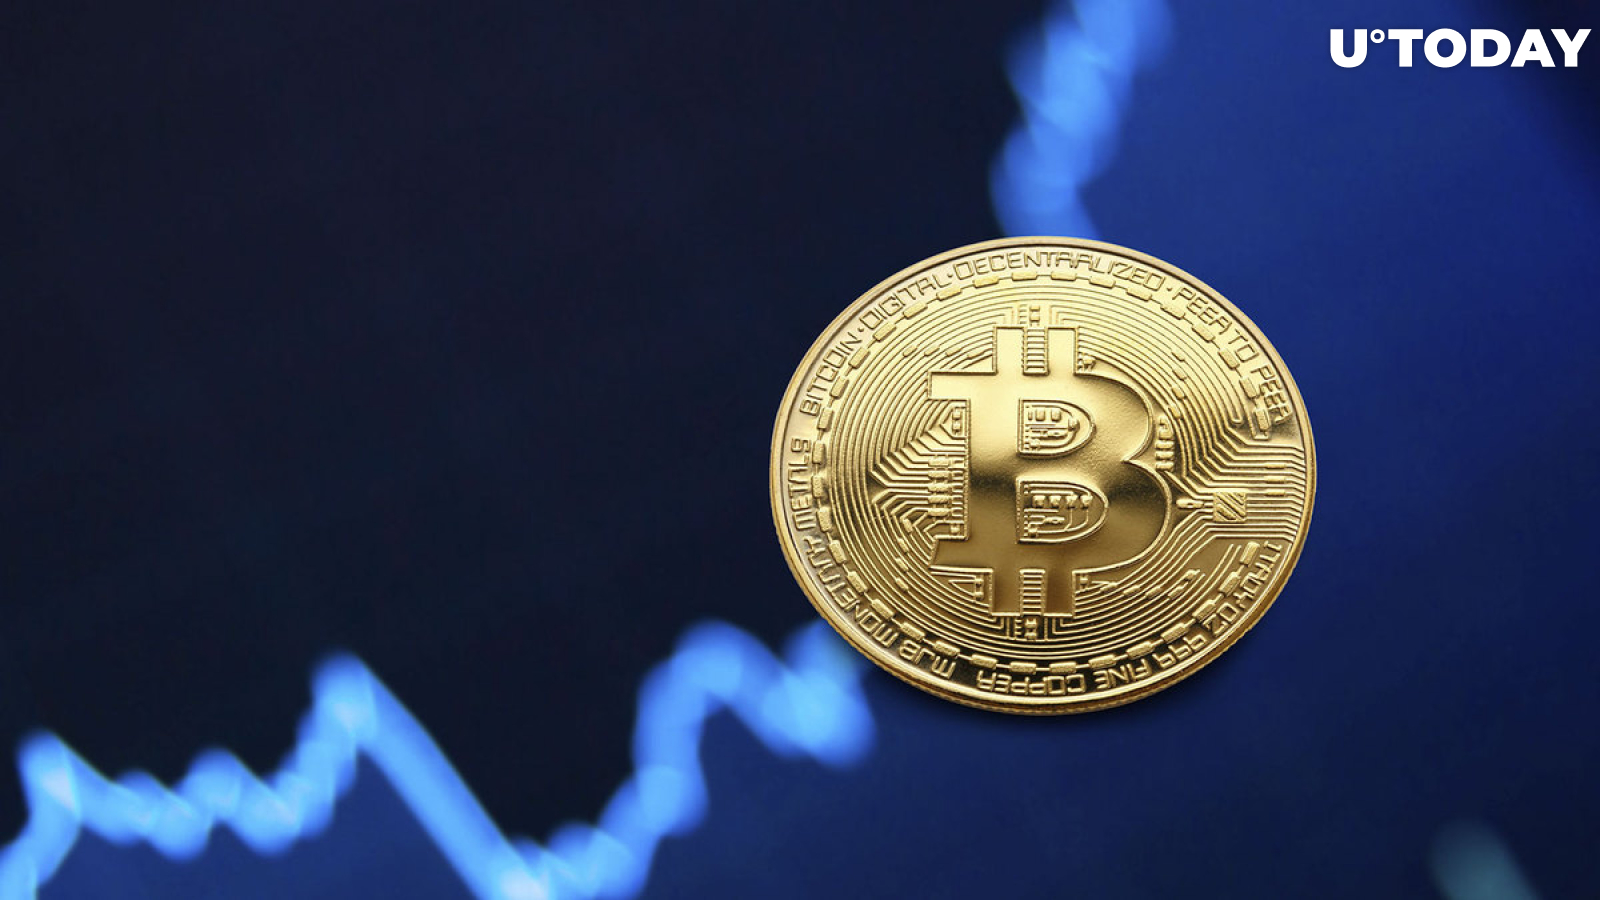 Bitcoin (BTC) Soars 18% in Week, Highest Since March